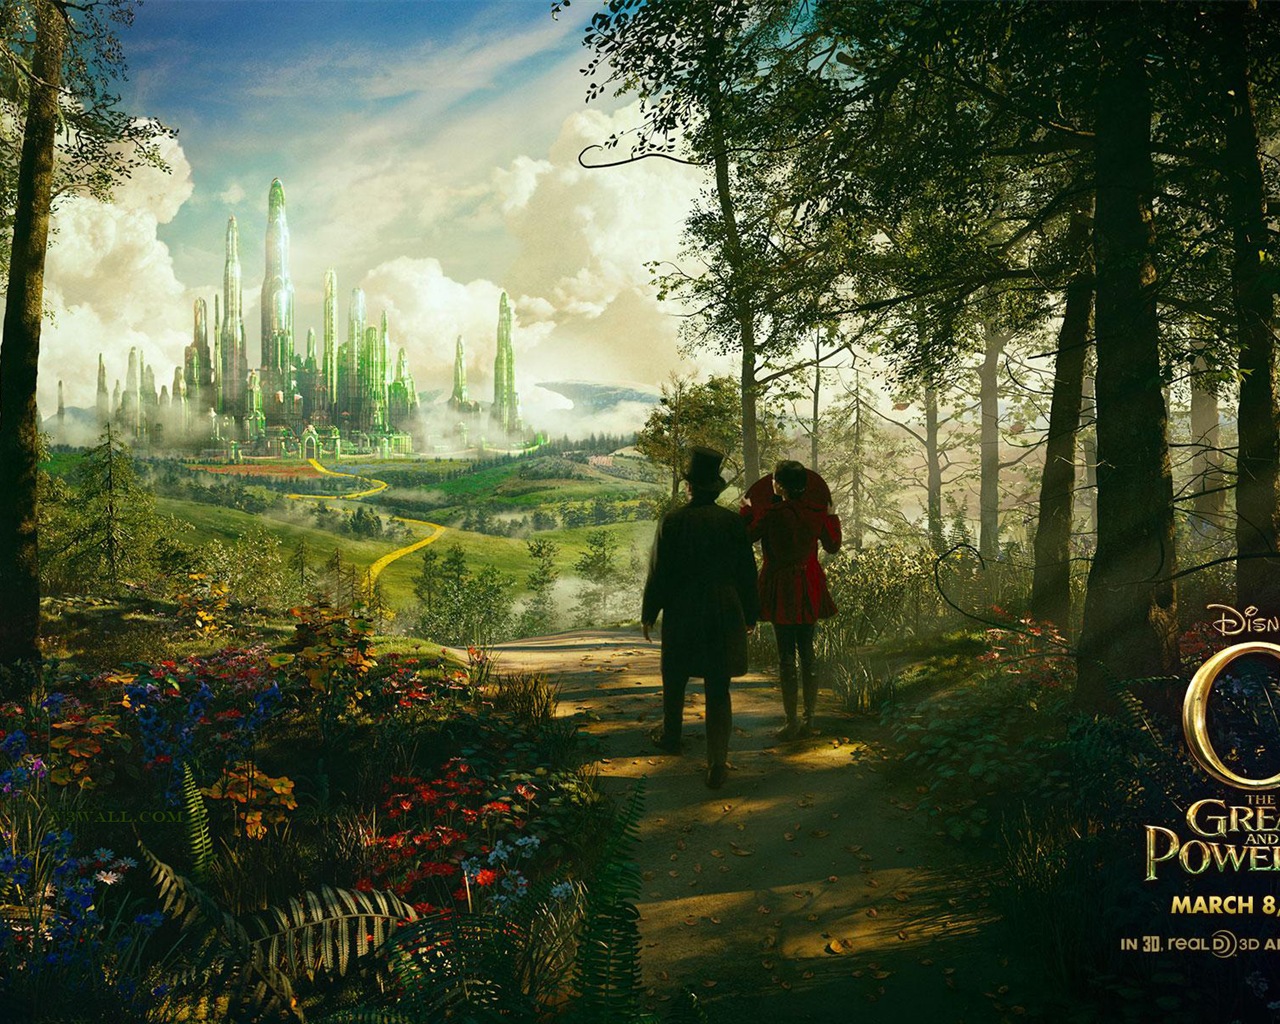 Oz The Great and Powerful 2013 HD wallpapers #11 - 1280x1024